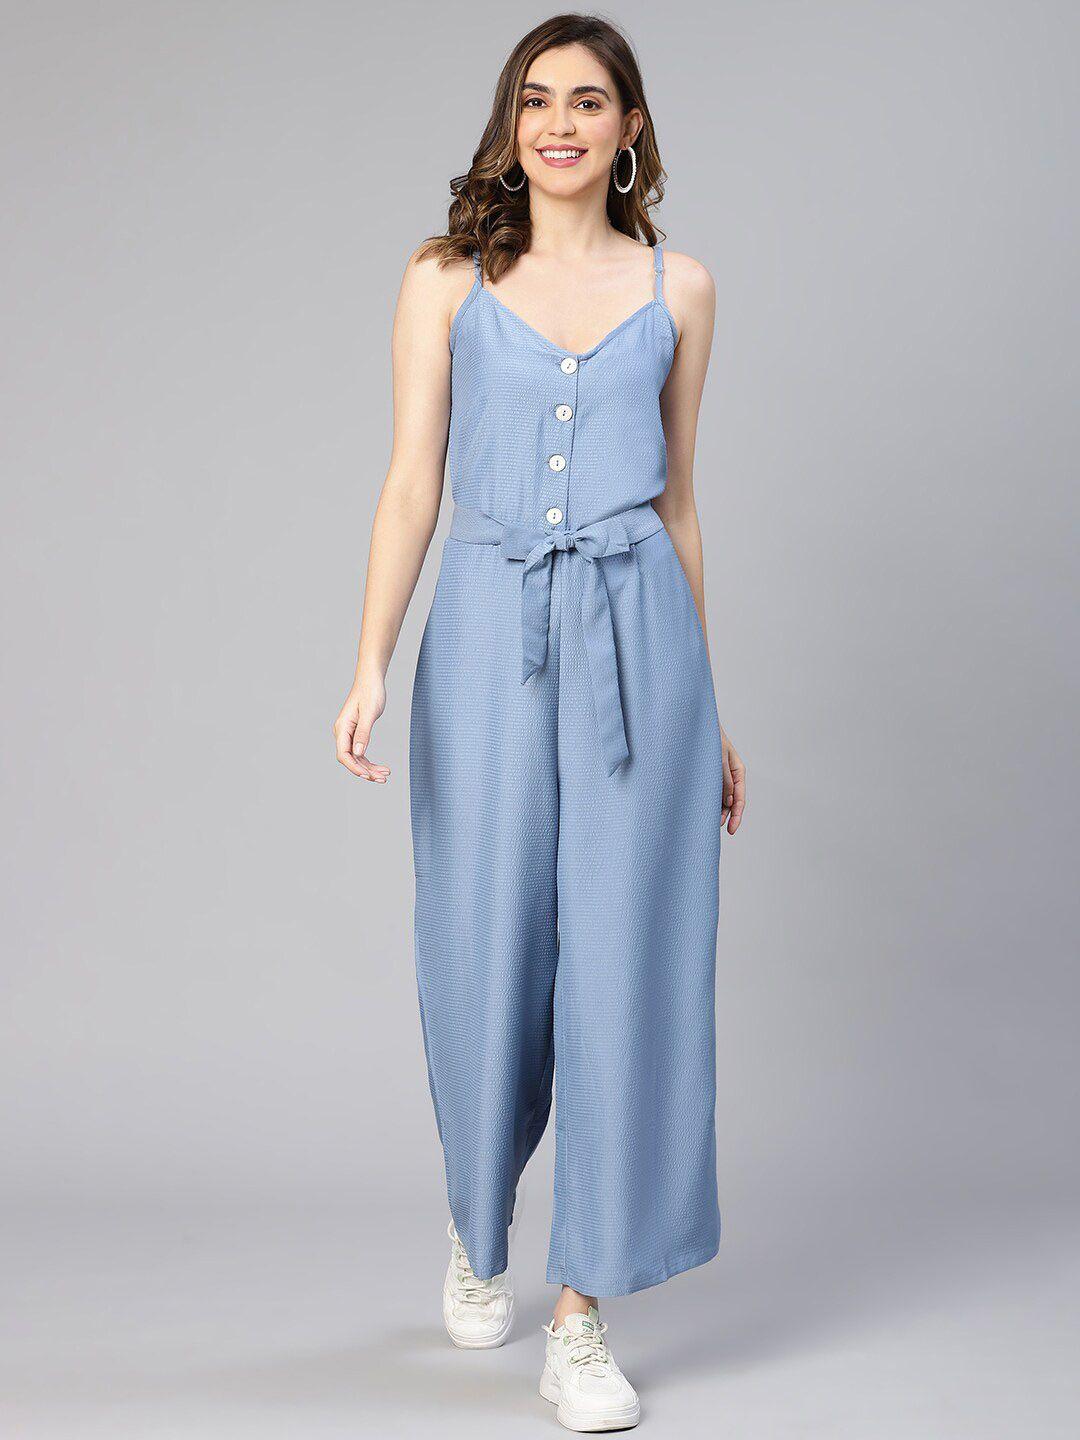 oxolloxo tie-knotted basic jumpsuit